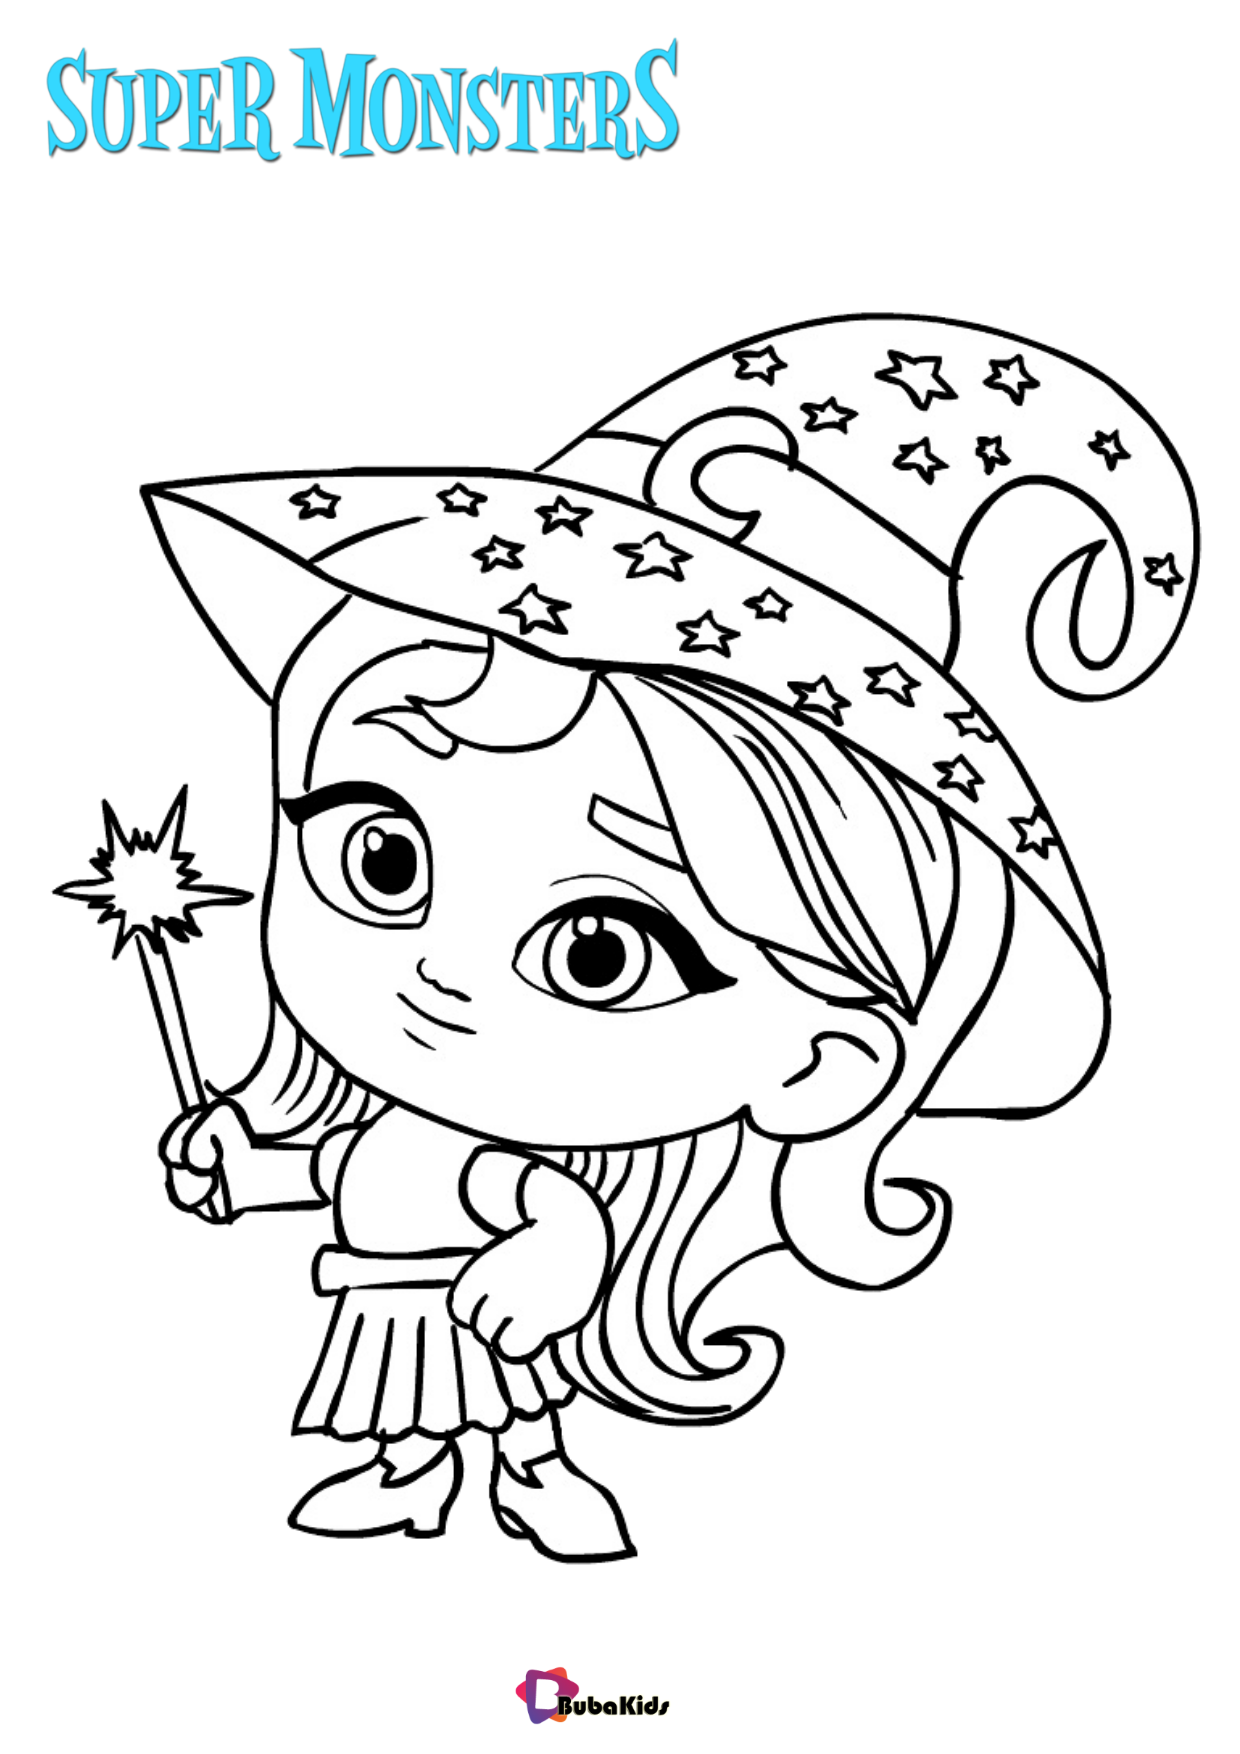 Katya Spelling Super Monsters TV show coloring pages Wallpaper